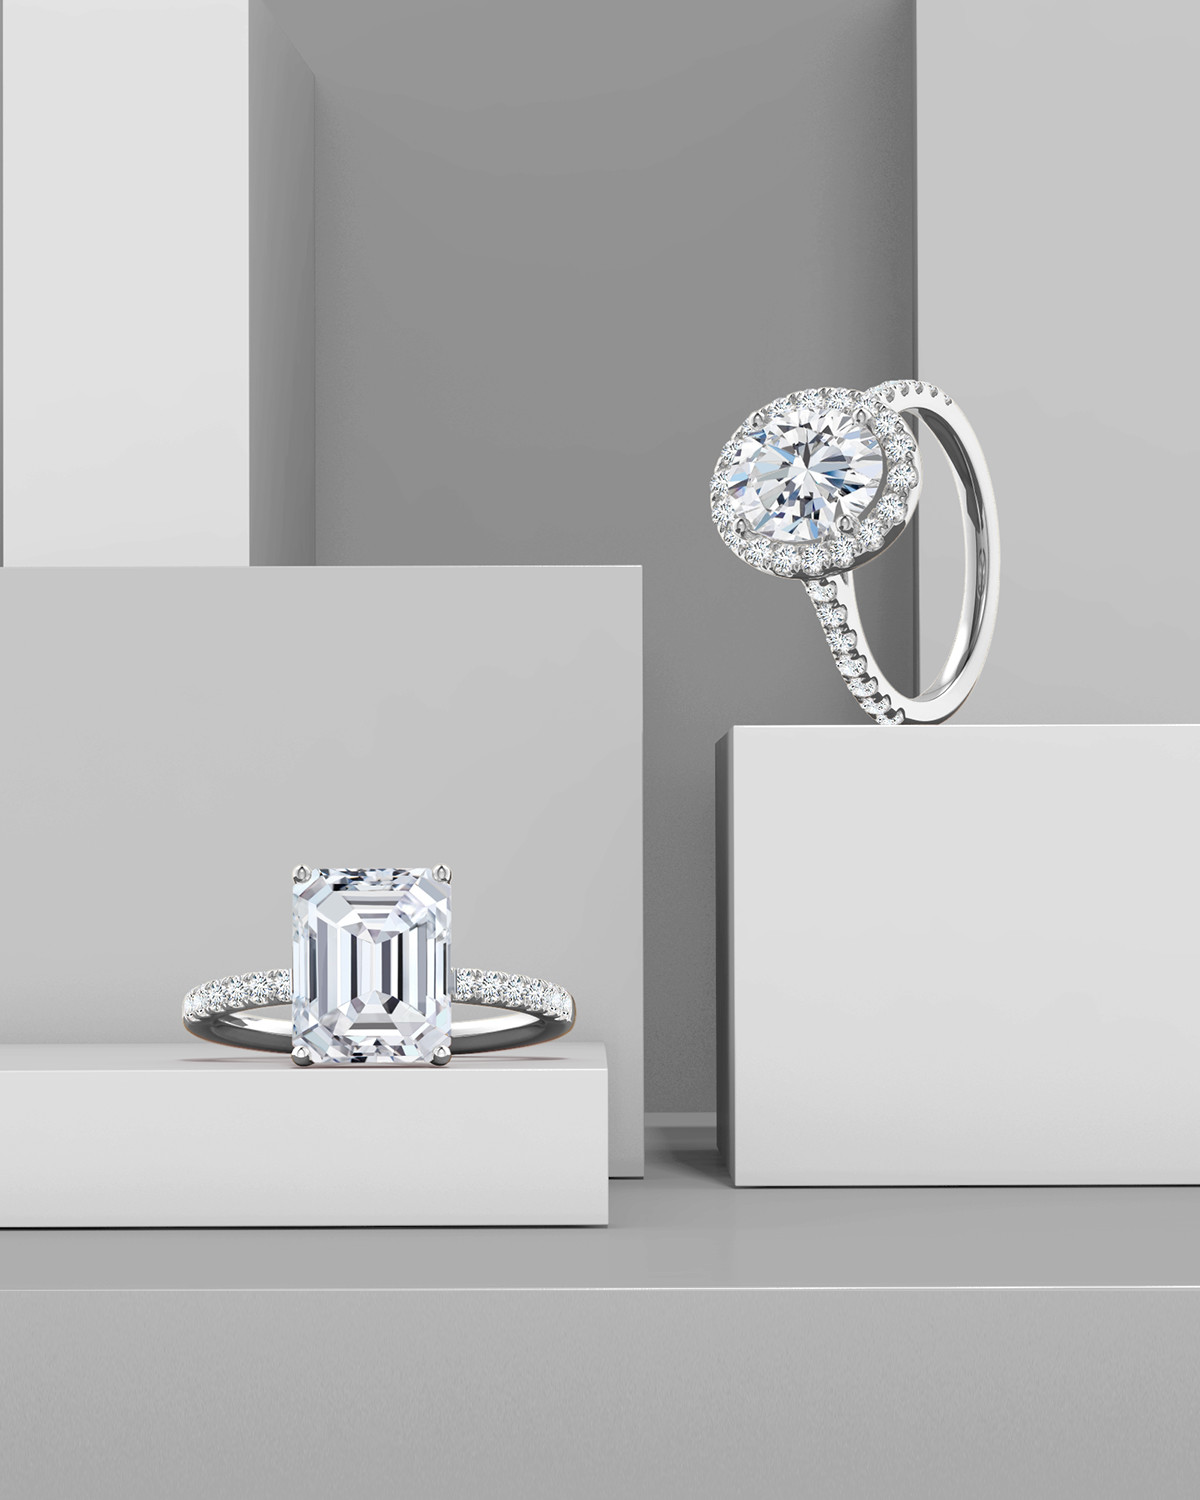 Ready To Propose? Don't Miss These Engagement Ring Trends